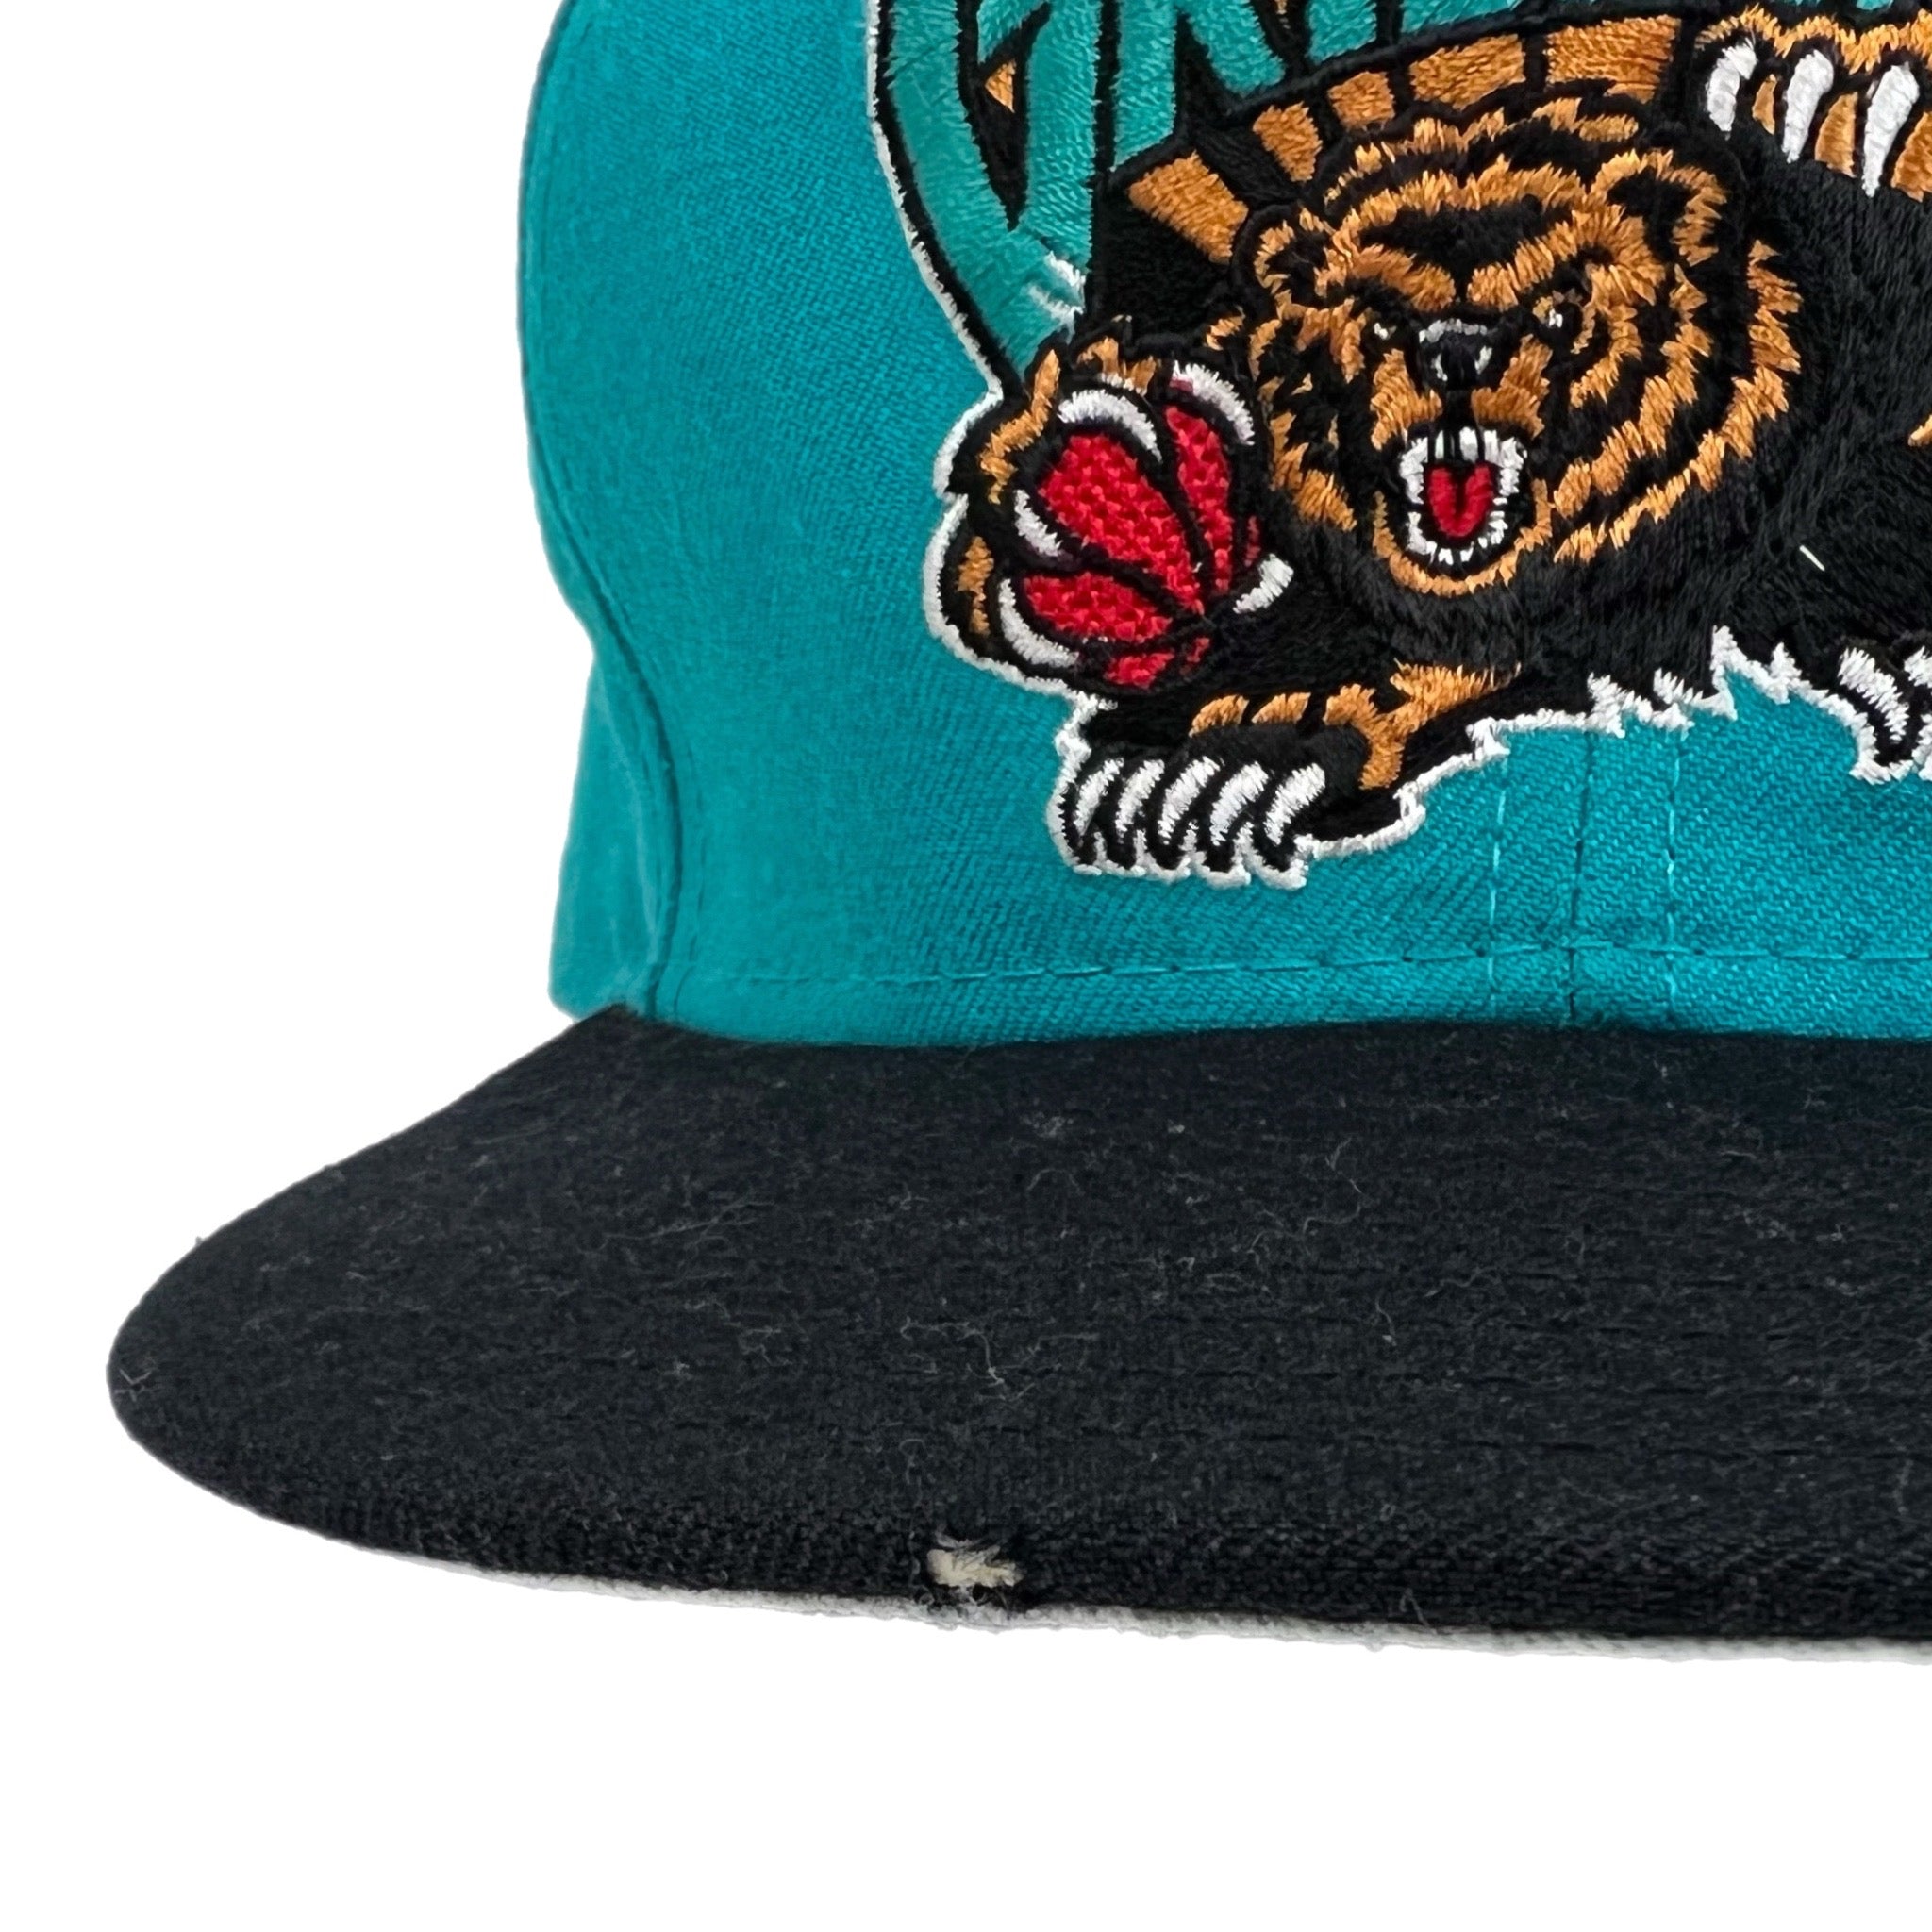 1994 New Era Vancouver Grizzlies Fitted Hat